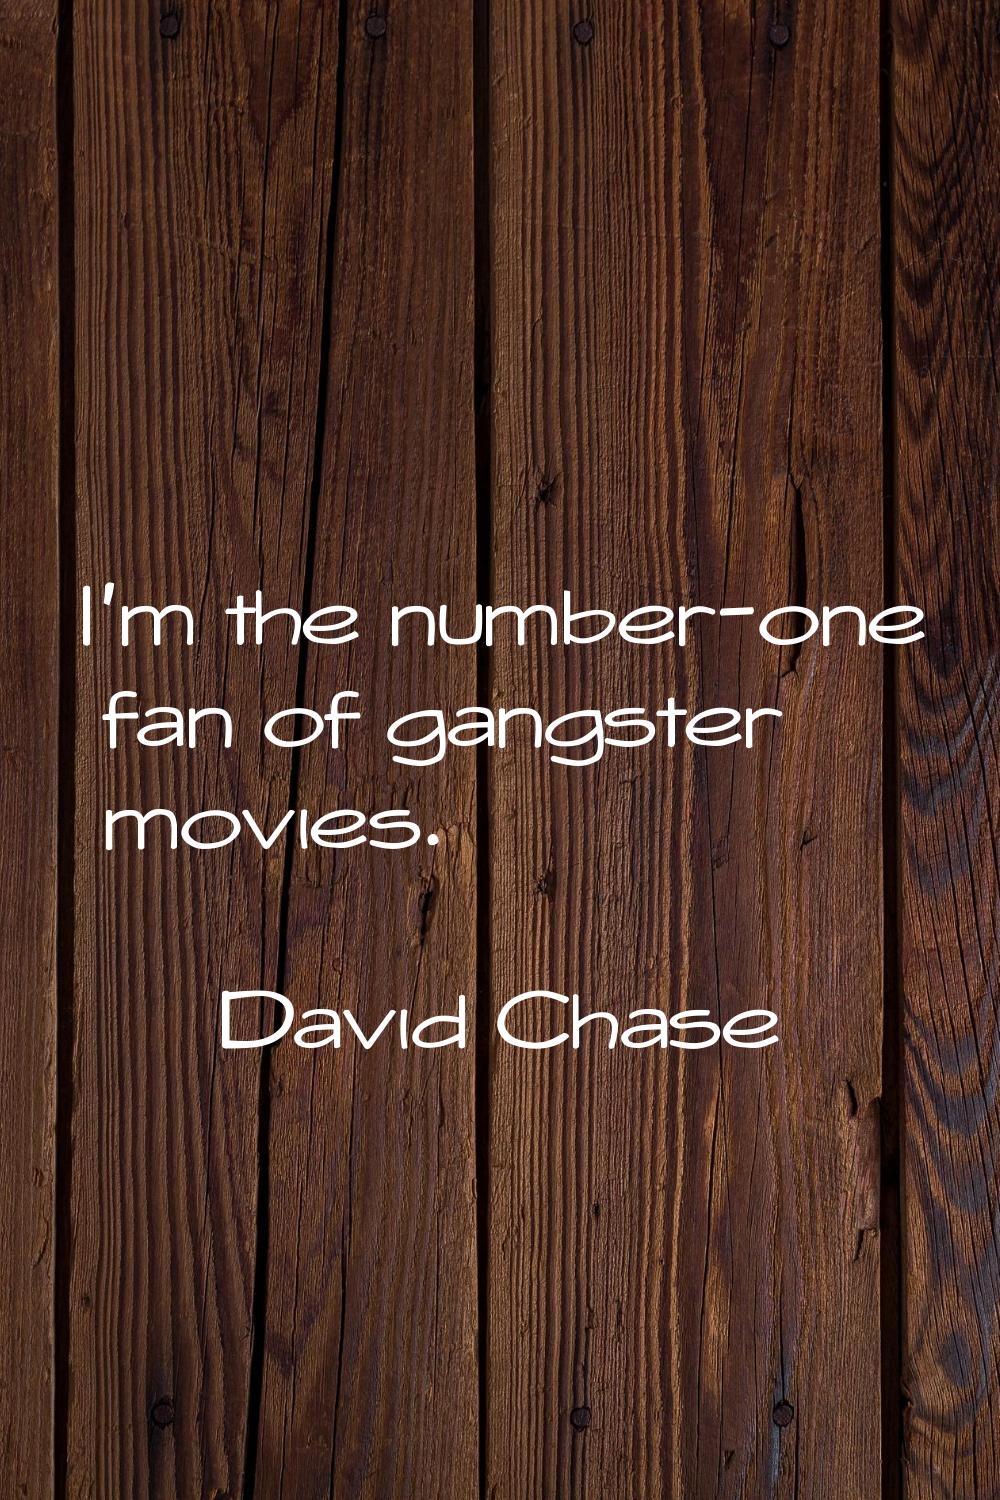 I'm the number-one fan of gangster movies.